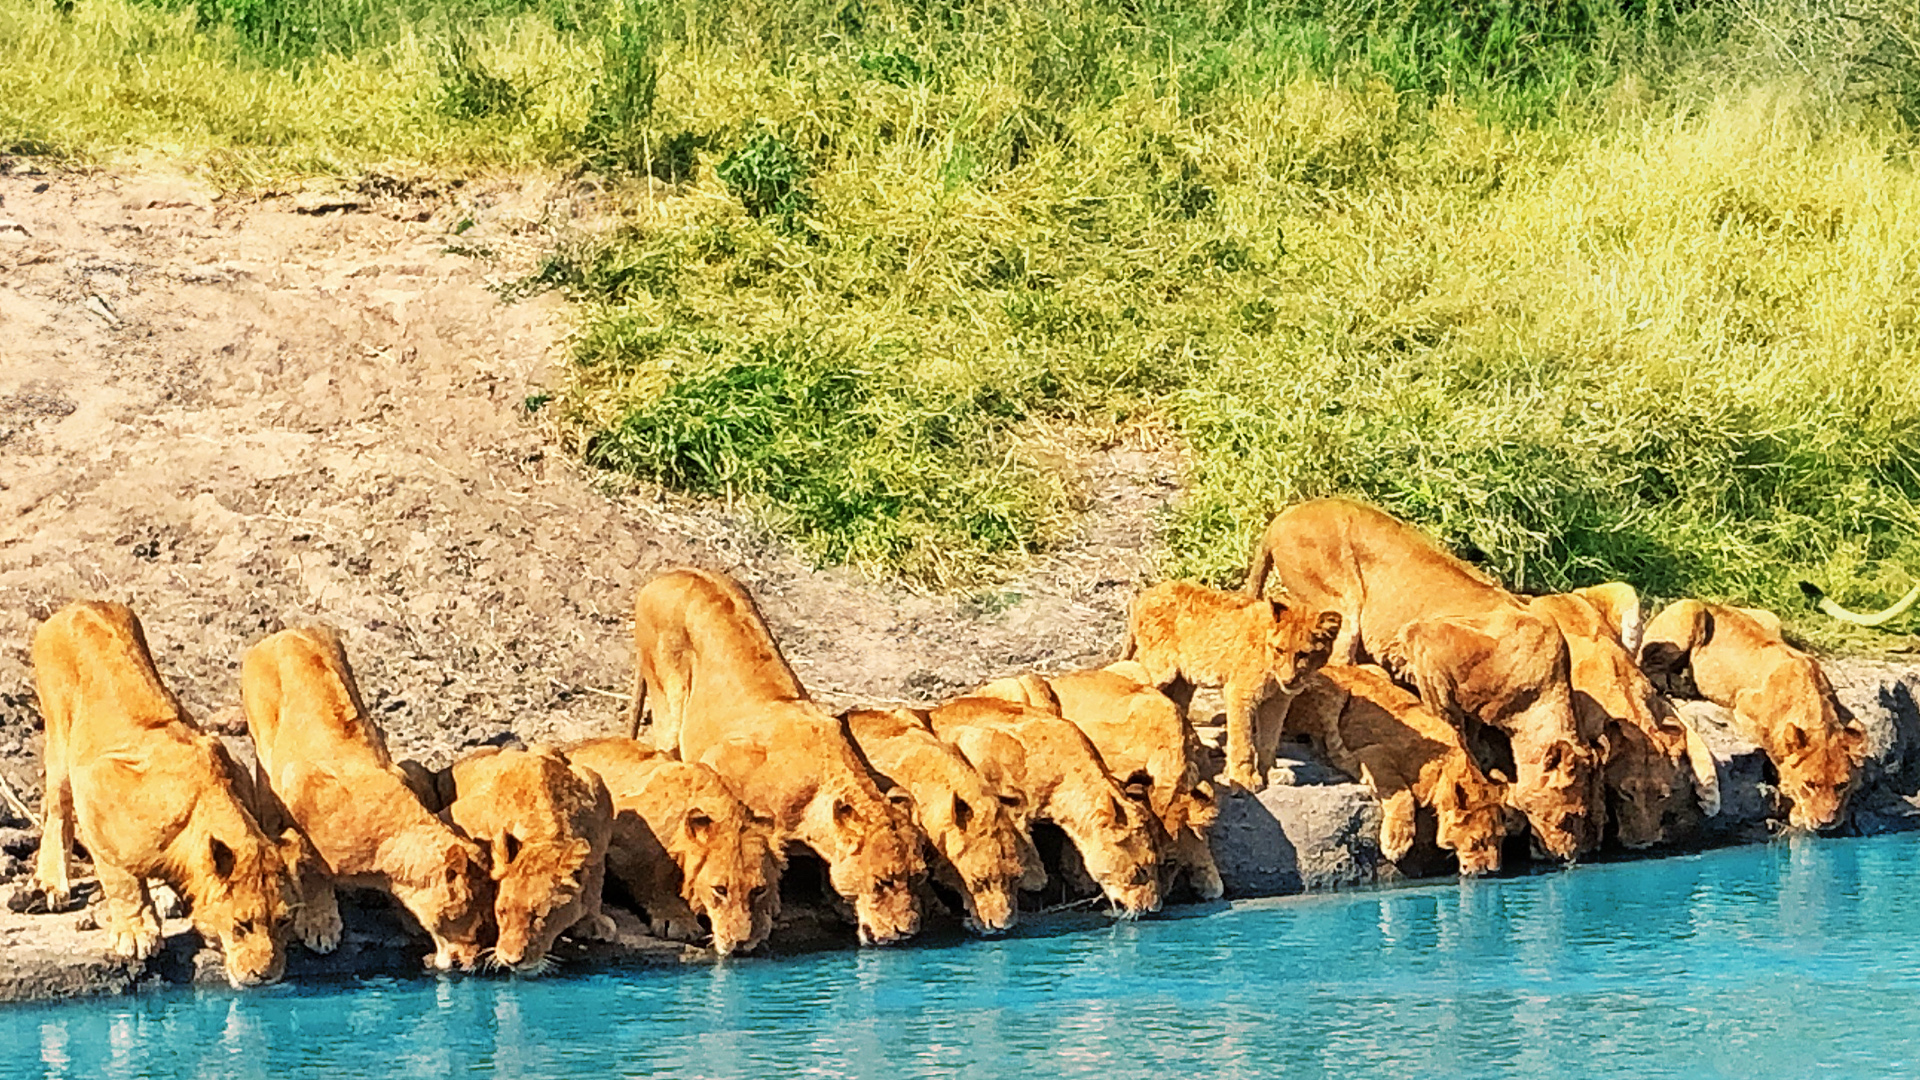 20 Lions Squeeze onto River Bank to Drink